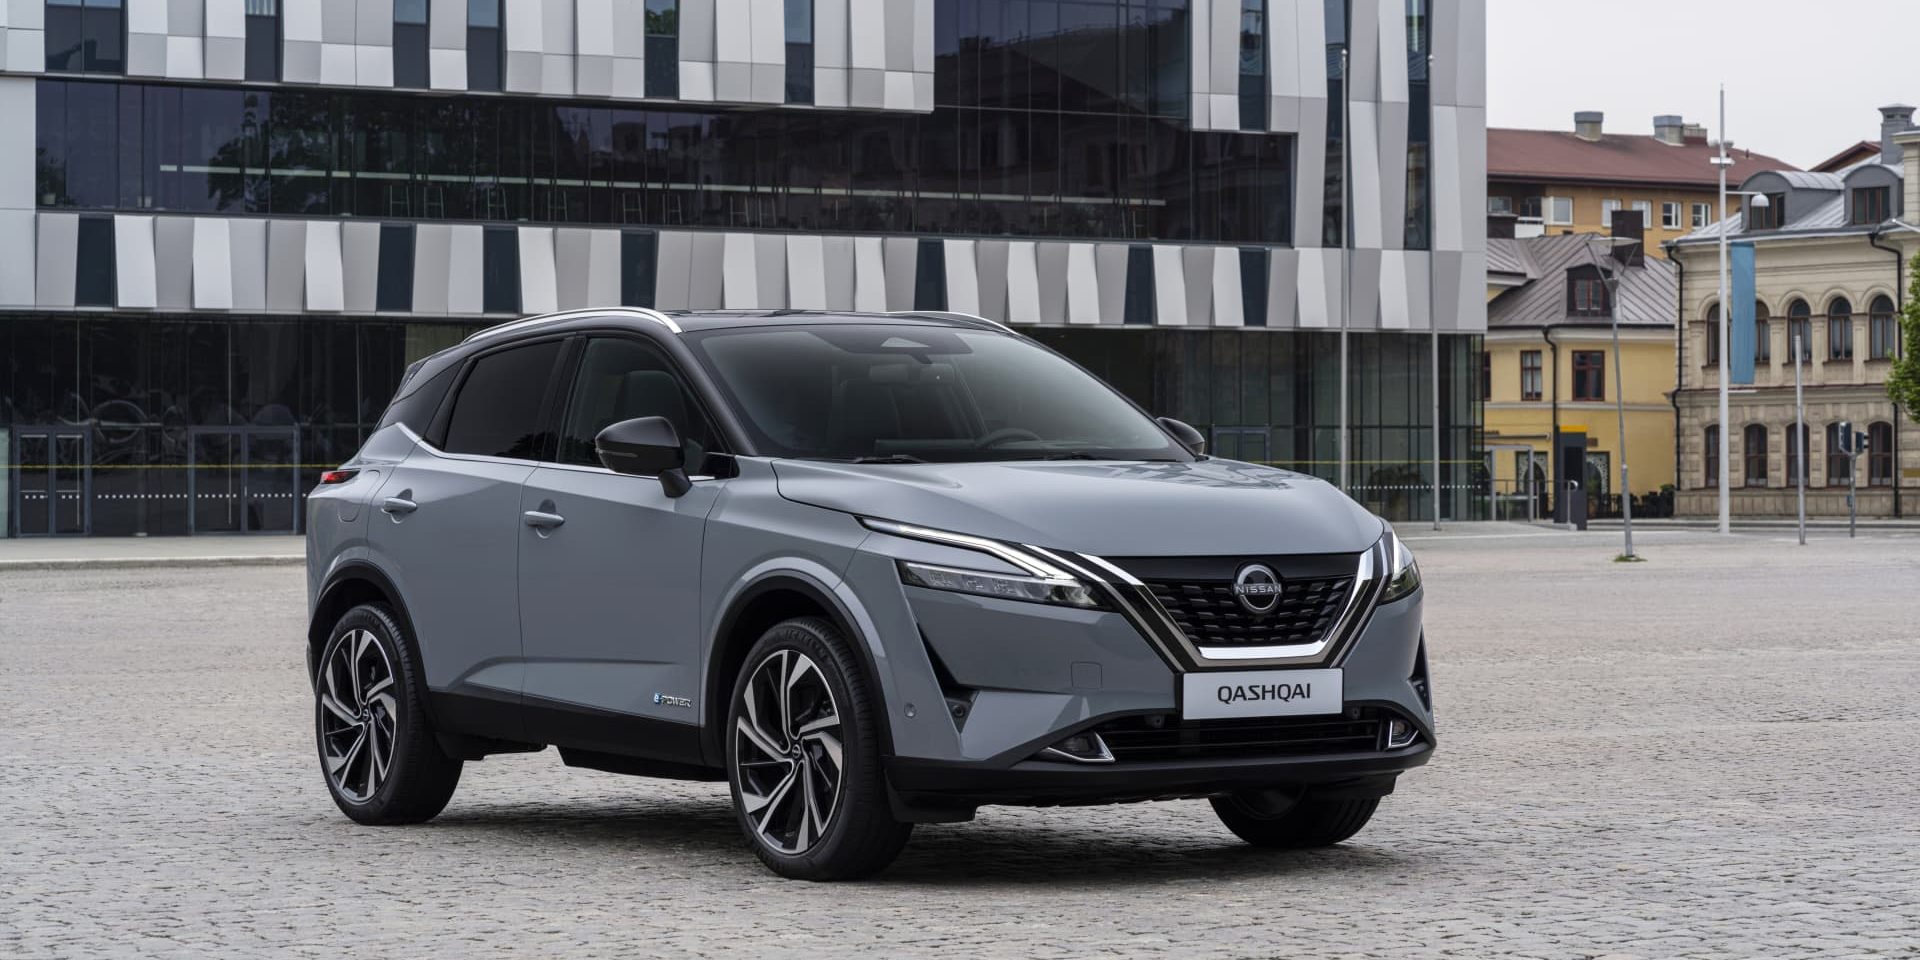 Nissan Qashqai E-Power hybrid SUV due by the end of this year